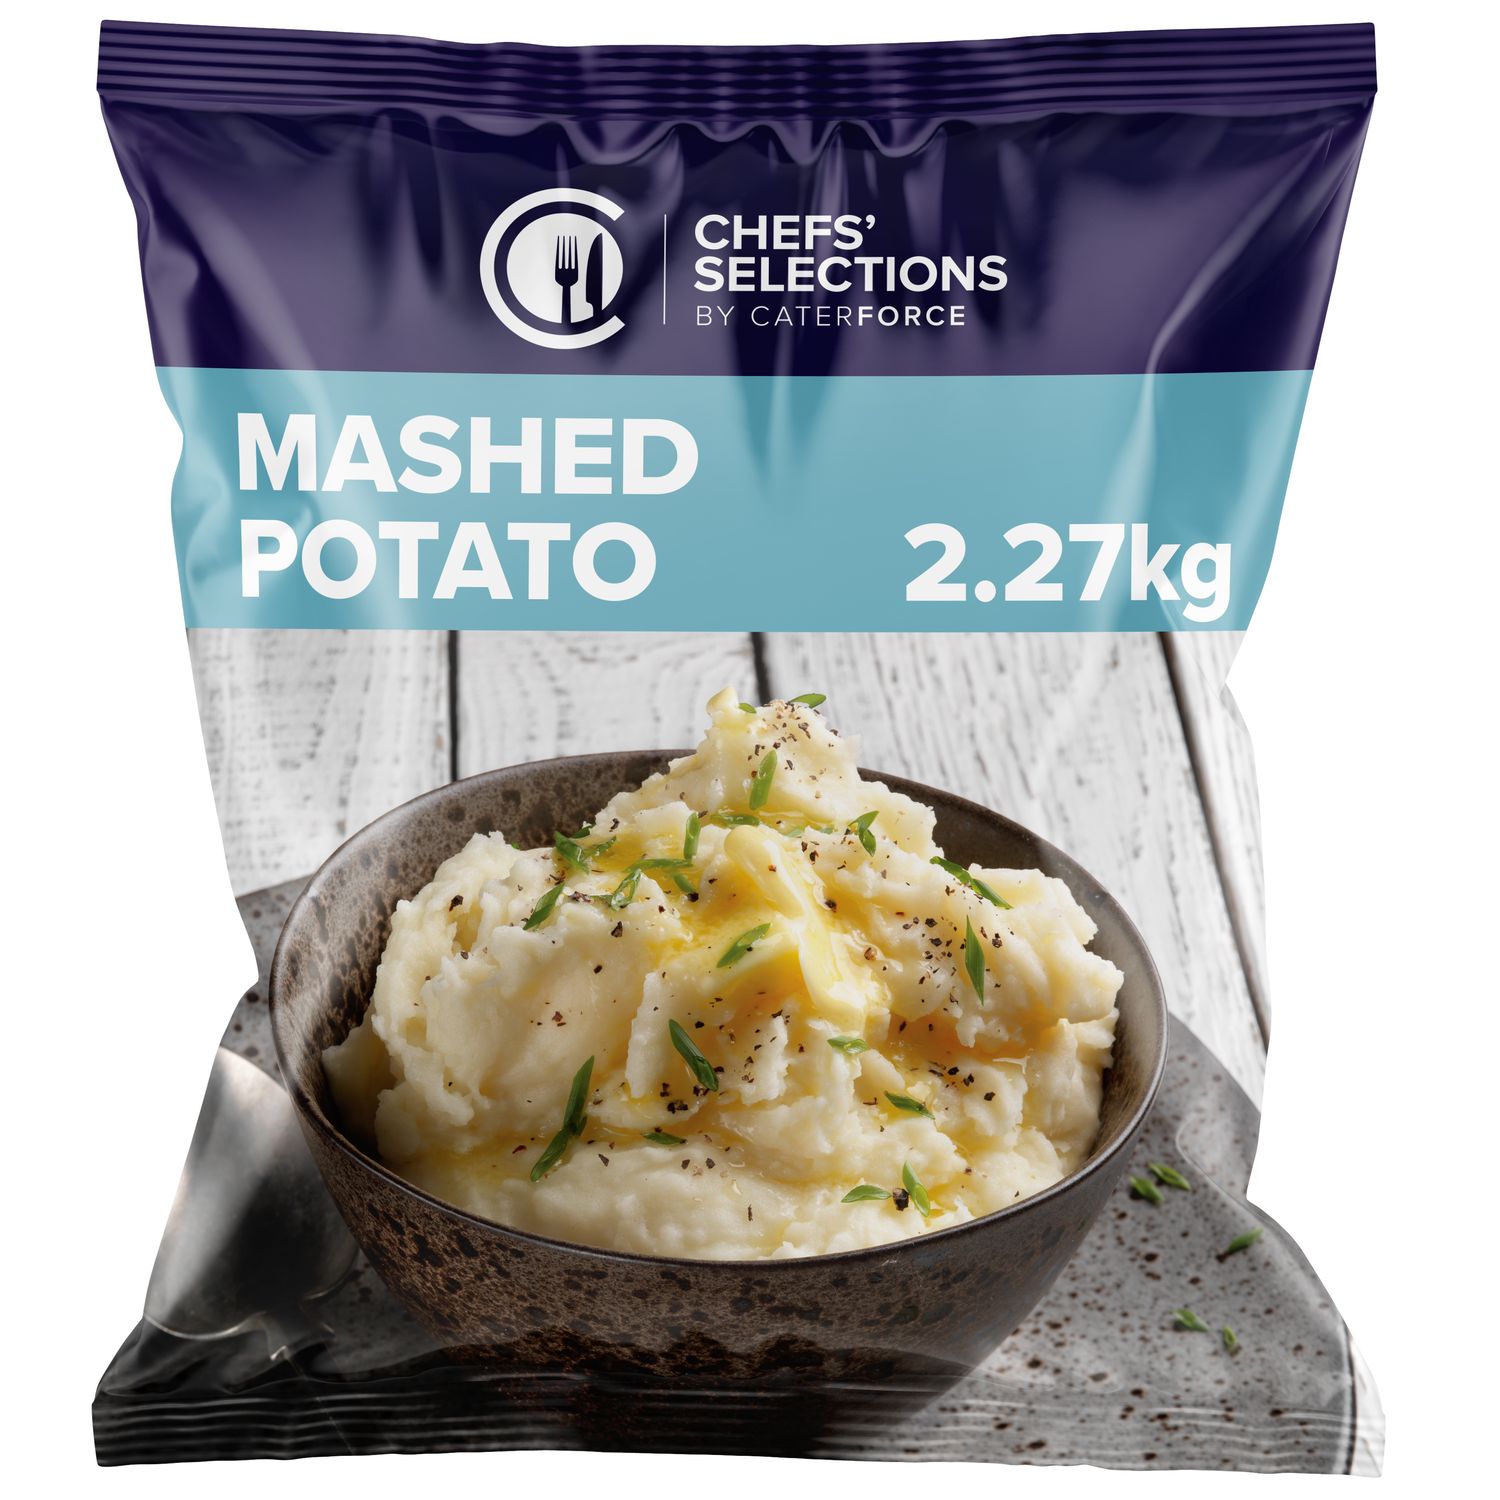 Chefs’ Selections Mashed Potato (4 x 2.27kg)